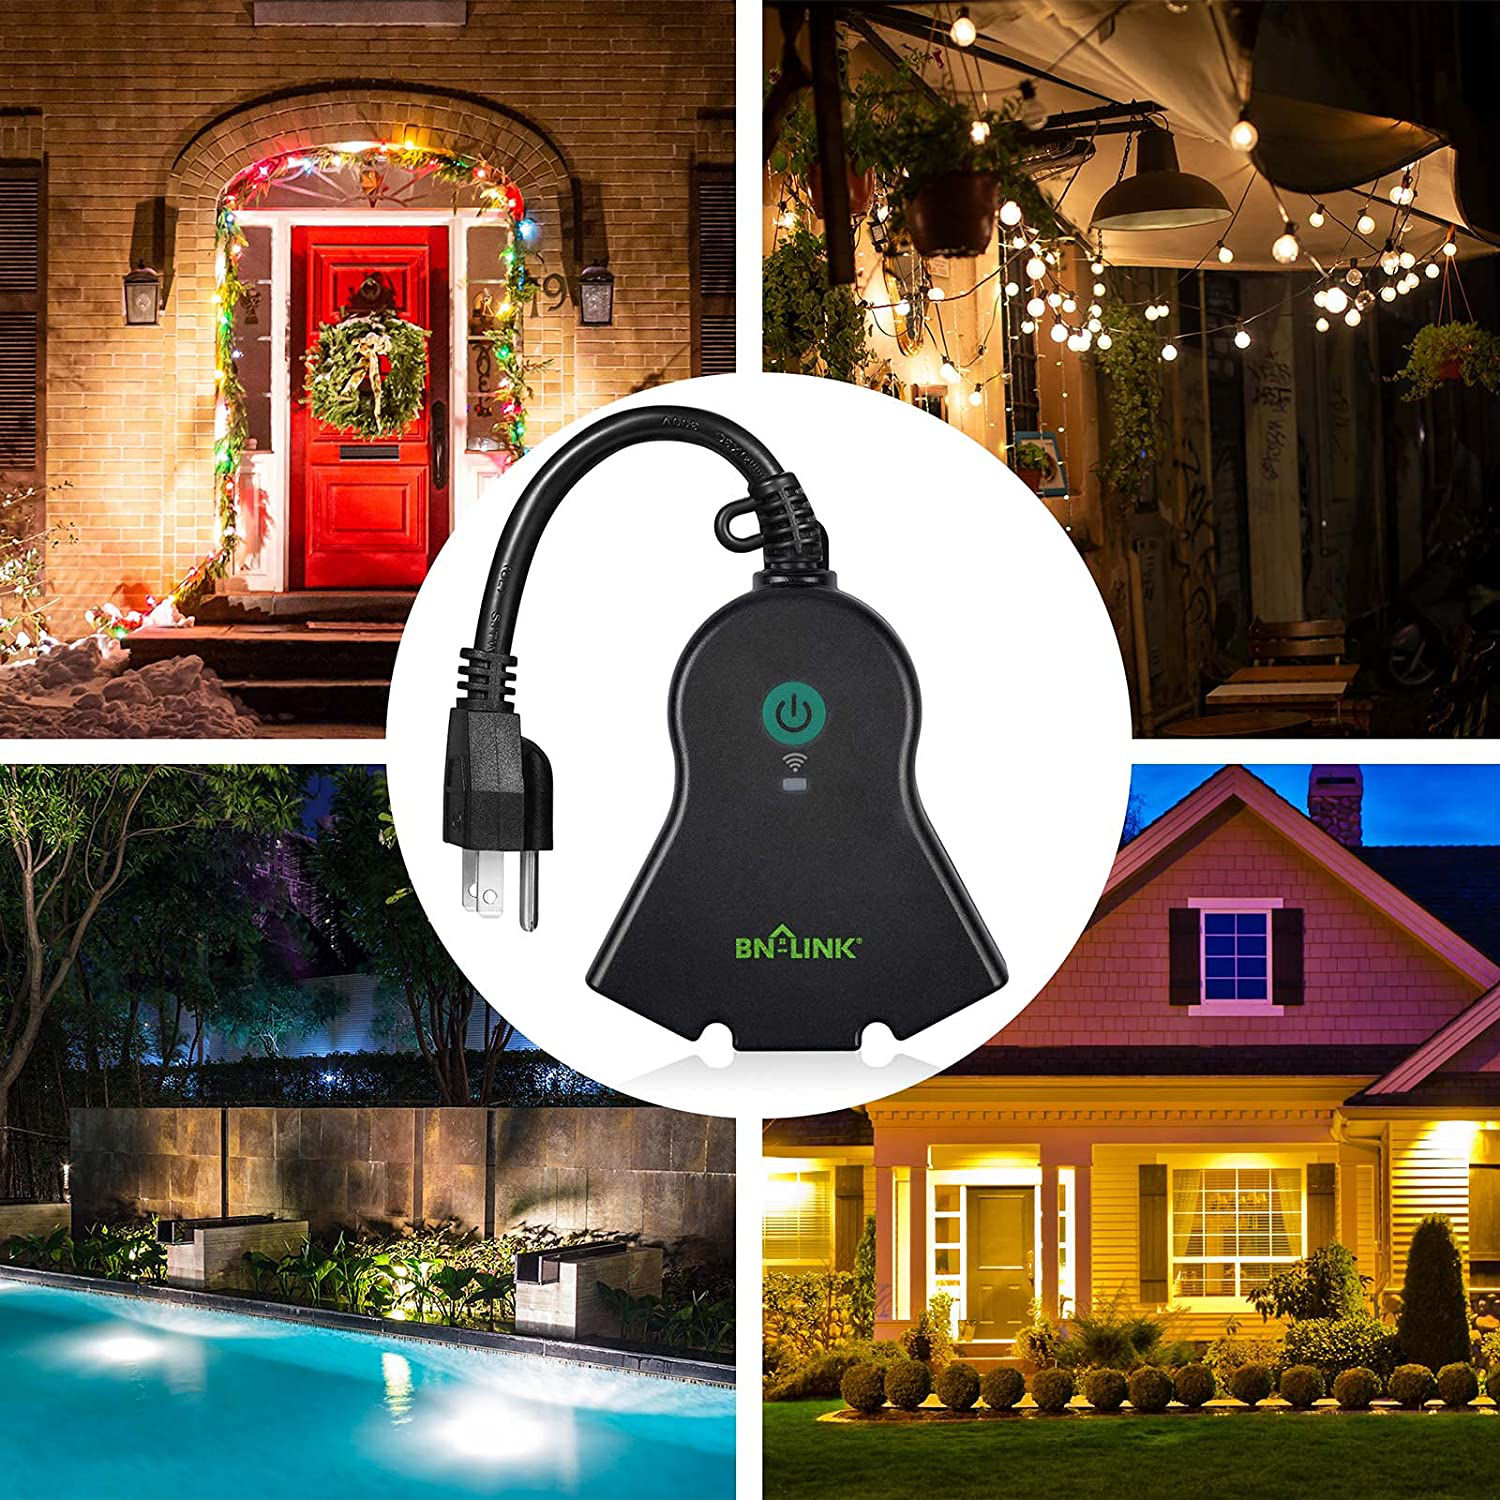 BN-LINK Smart Wifi Heavy Duty Outdoor Outlet, Timer and Countdown Function, No Hub Required for Outdoor Lights, Compatible with Alexa and Google Assistant (Outdoor) 2.4 Ghz Network Only